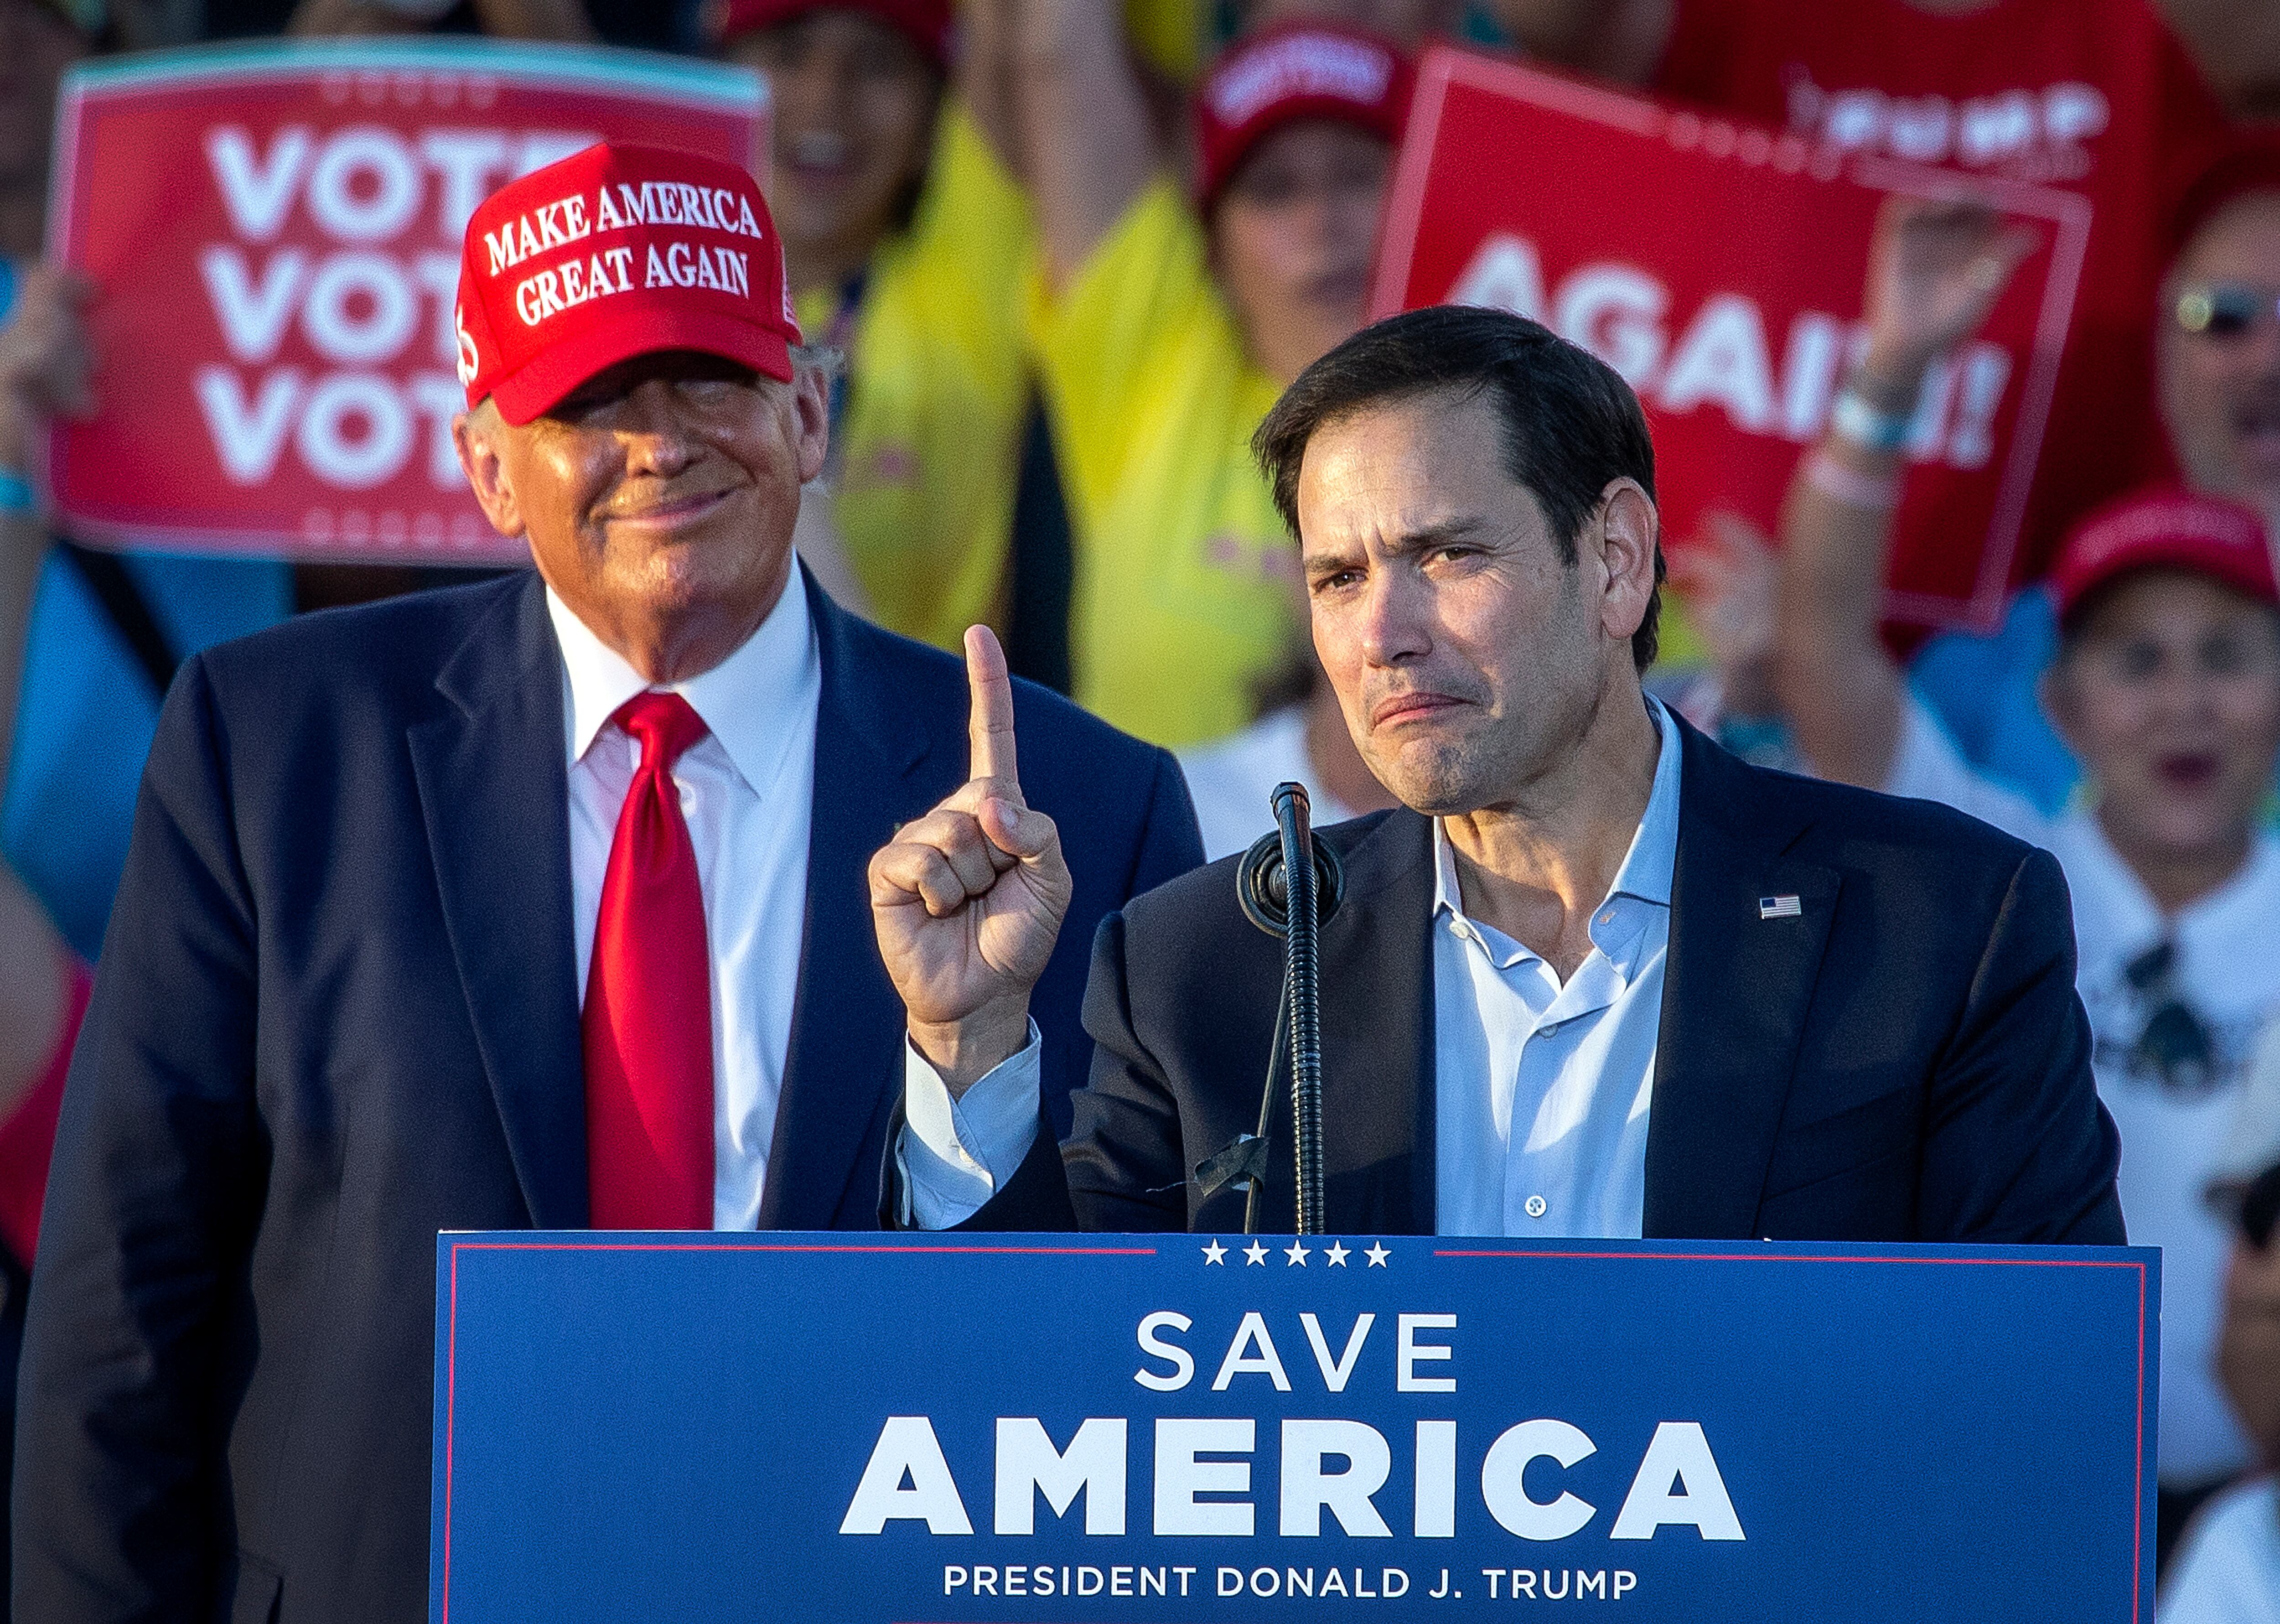 Marco Rubio speaks at a rally in Miami in 2022, as Trump looks on.